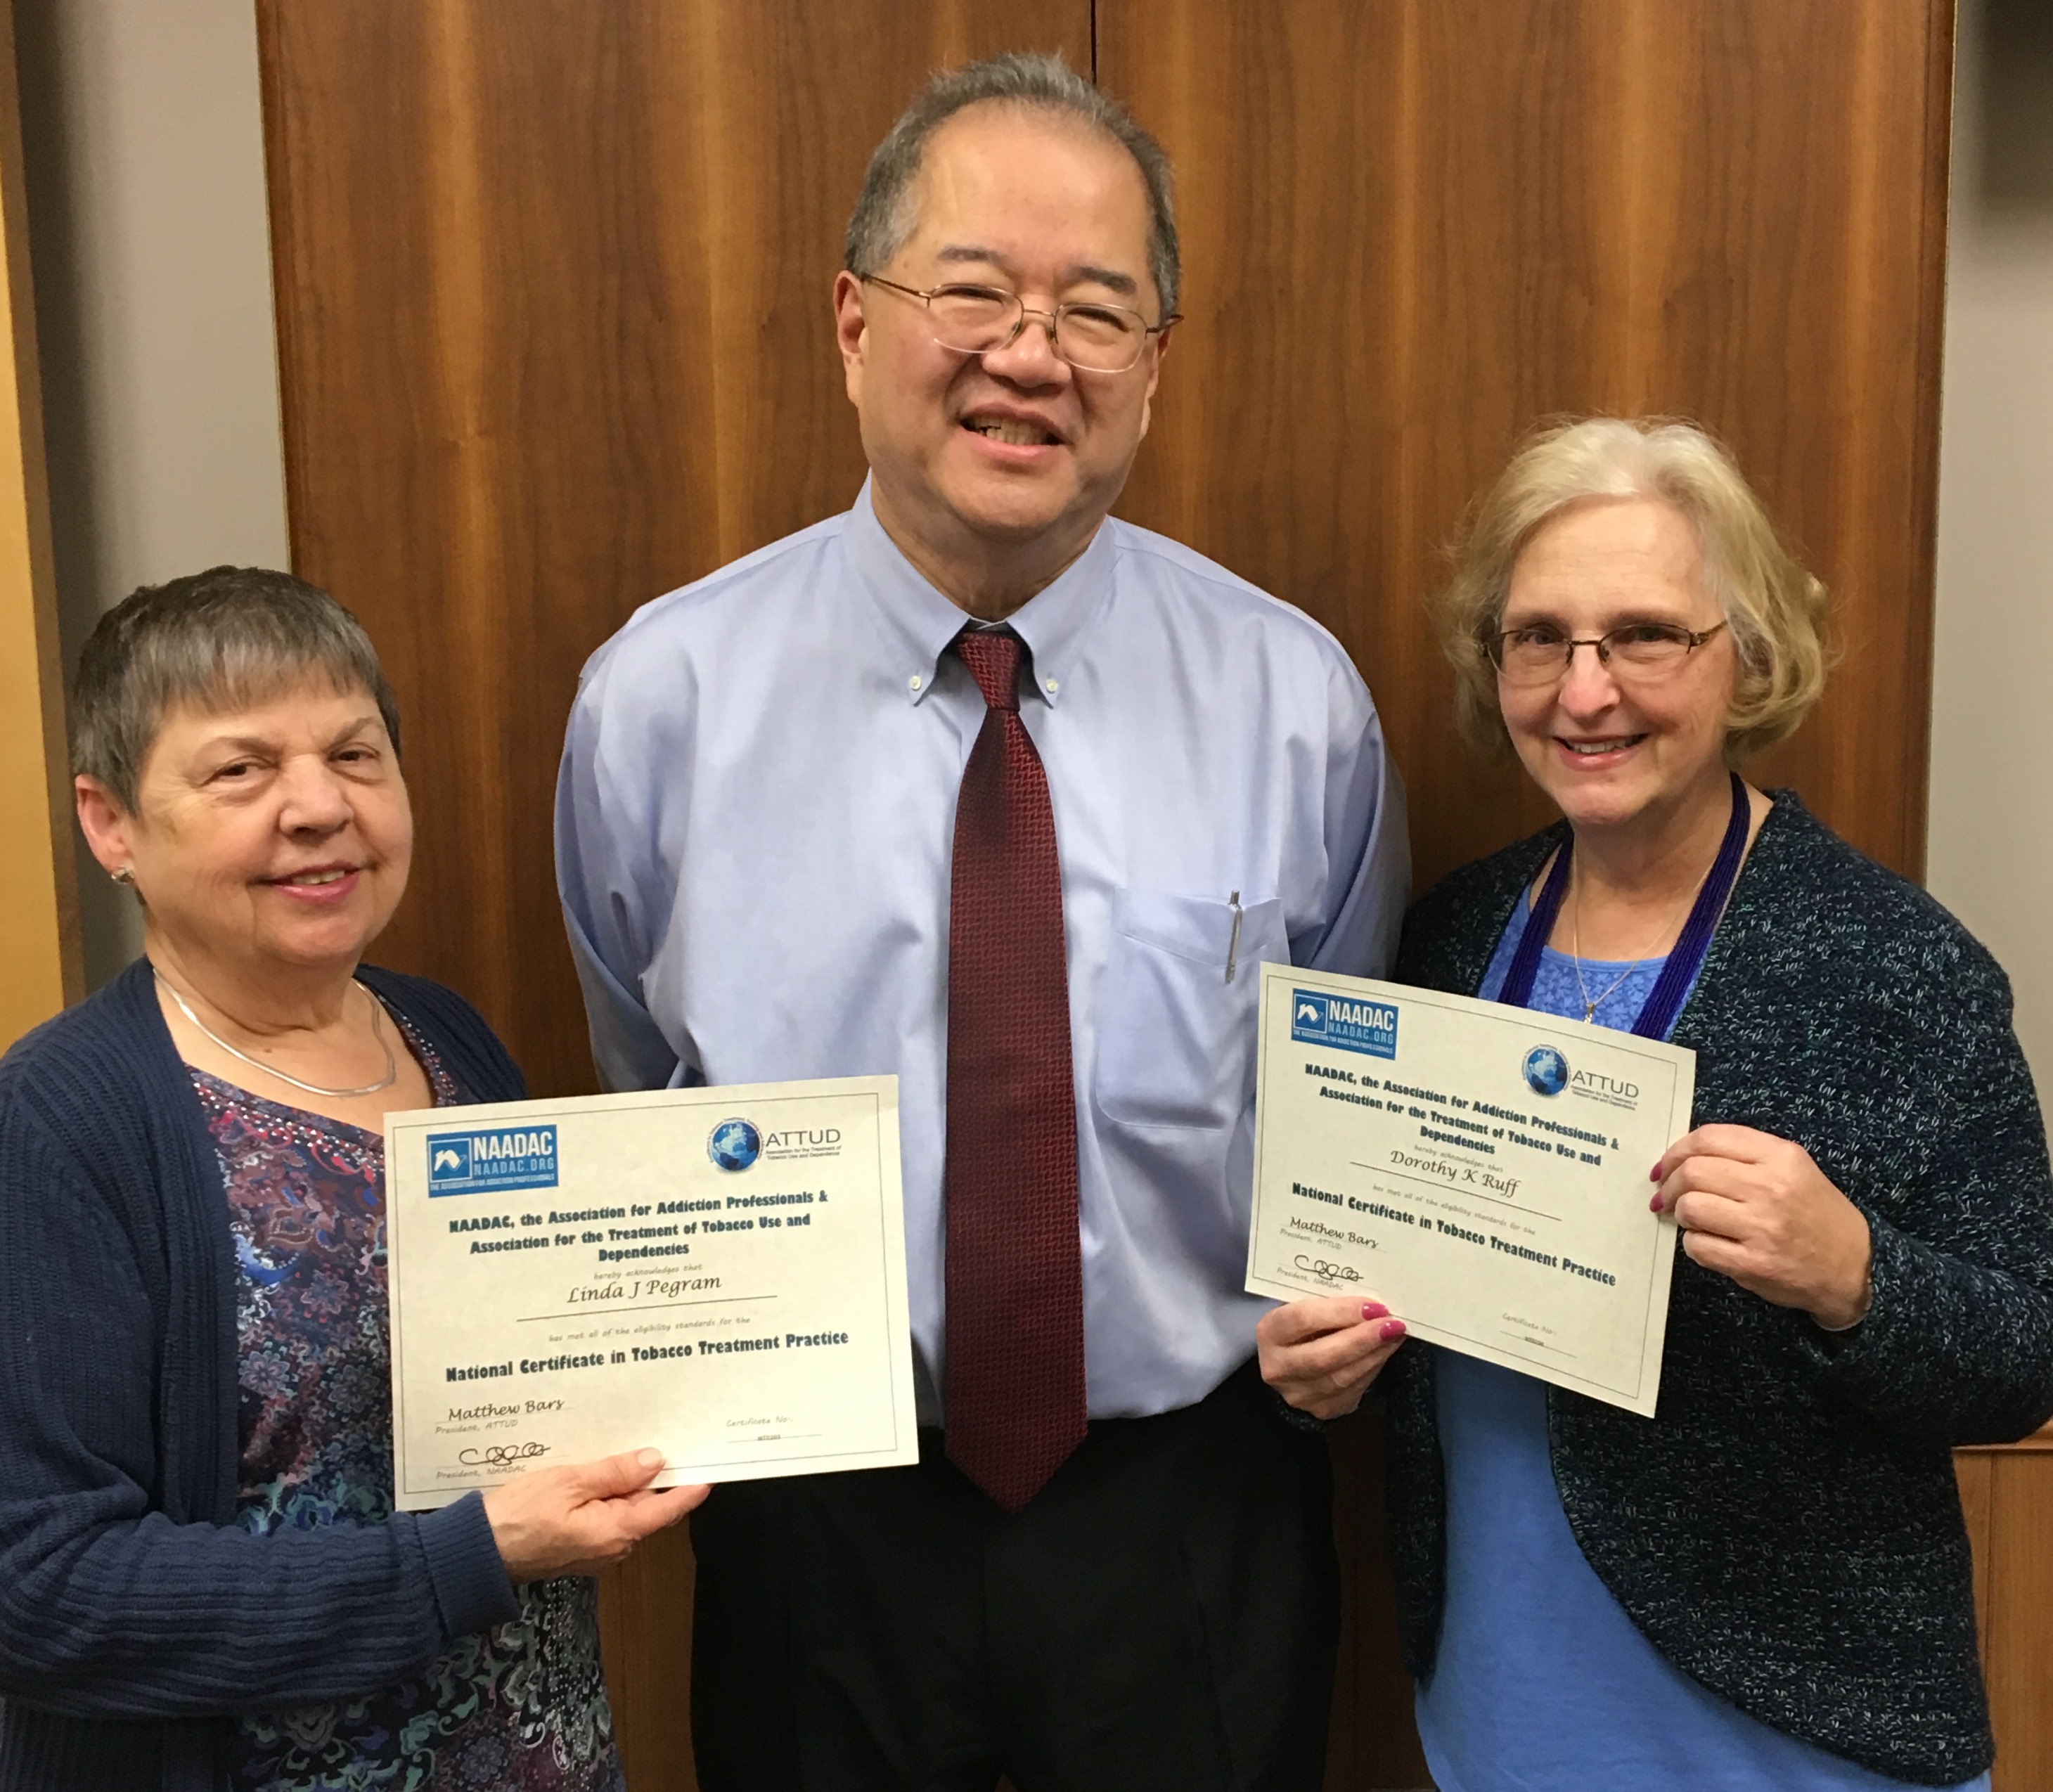 Pictured: Linda Pegram, Health Officer Dr. Russell Moy, and Dottie Ruff